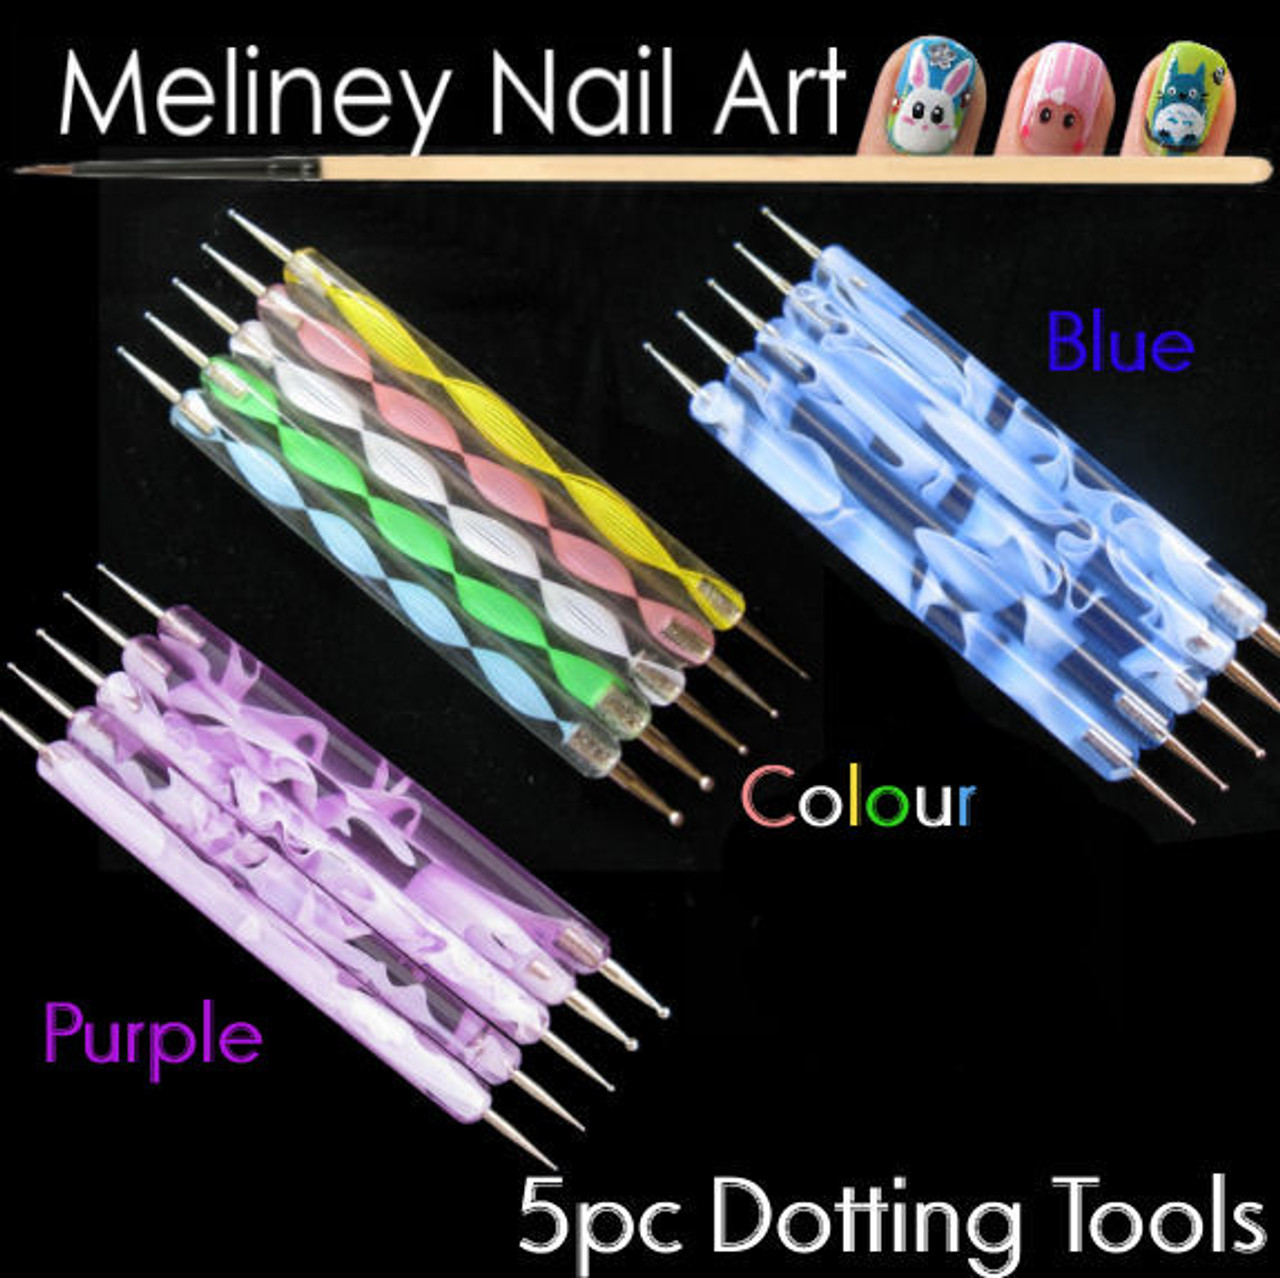 Dotting Tools - Nail Art Tool for creating dots and flowers